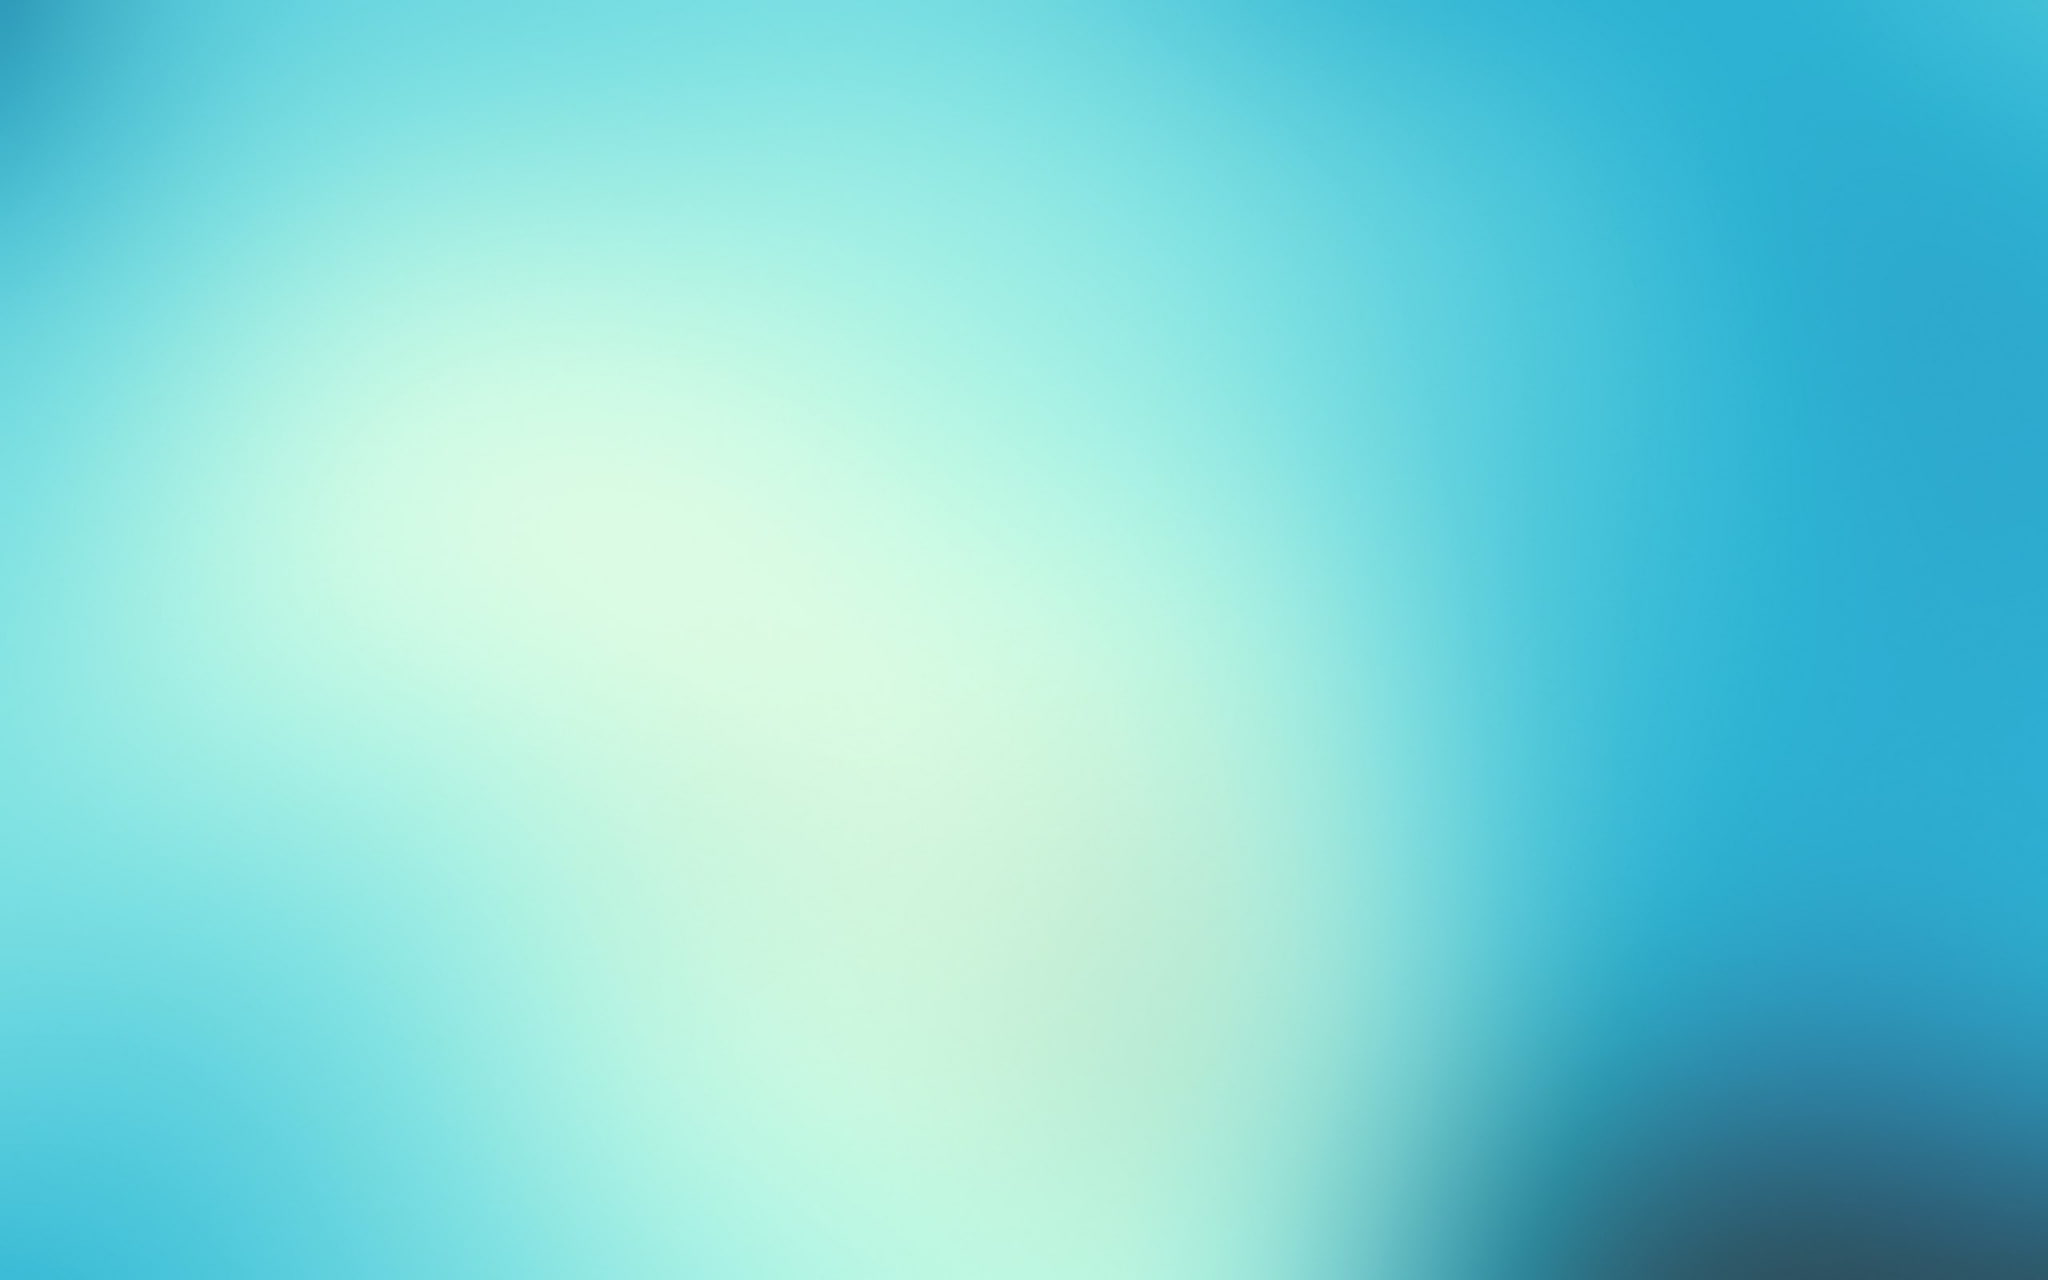 blue  widescreen retina imac, backgrounds, copy space, abstract